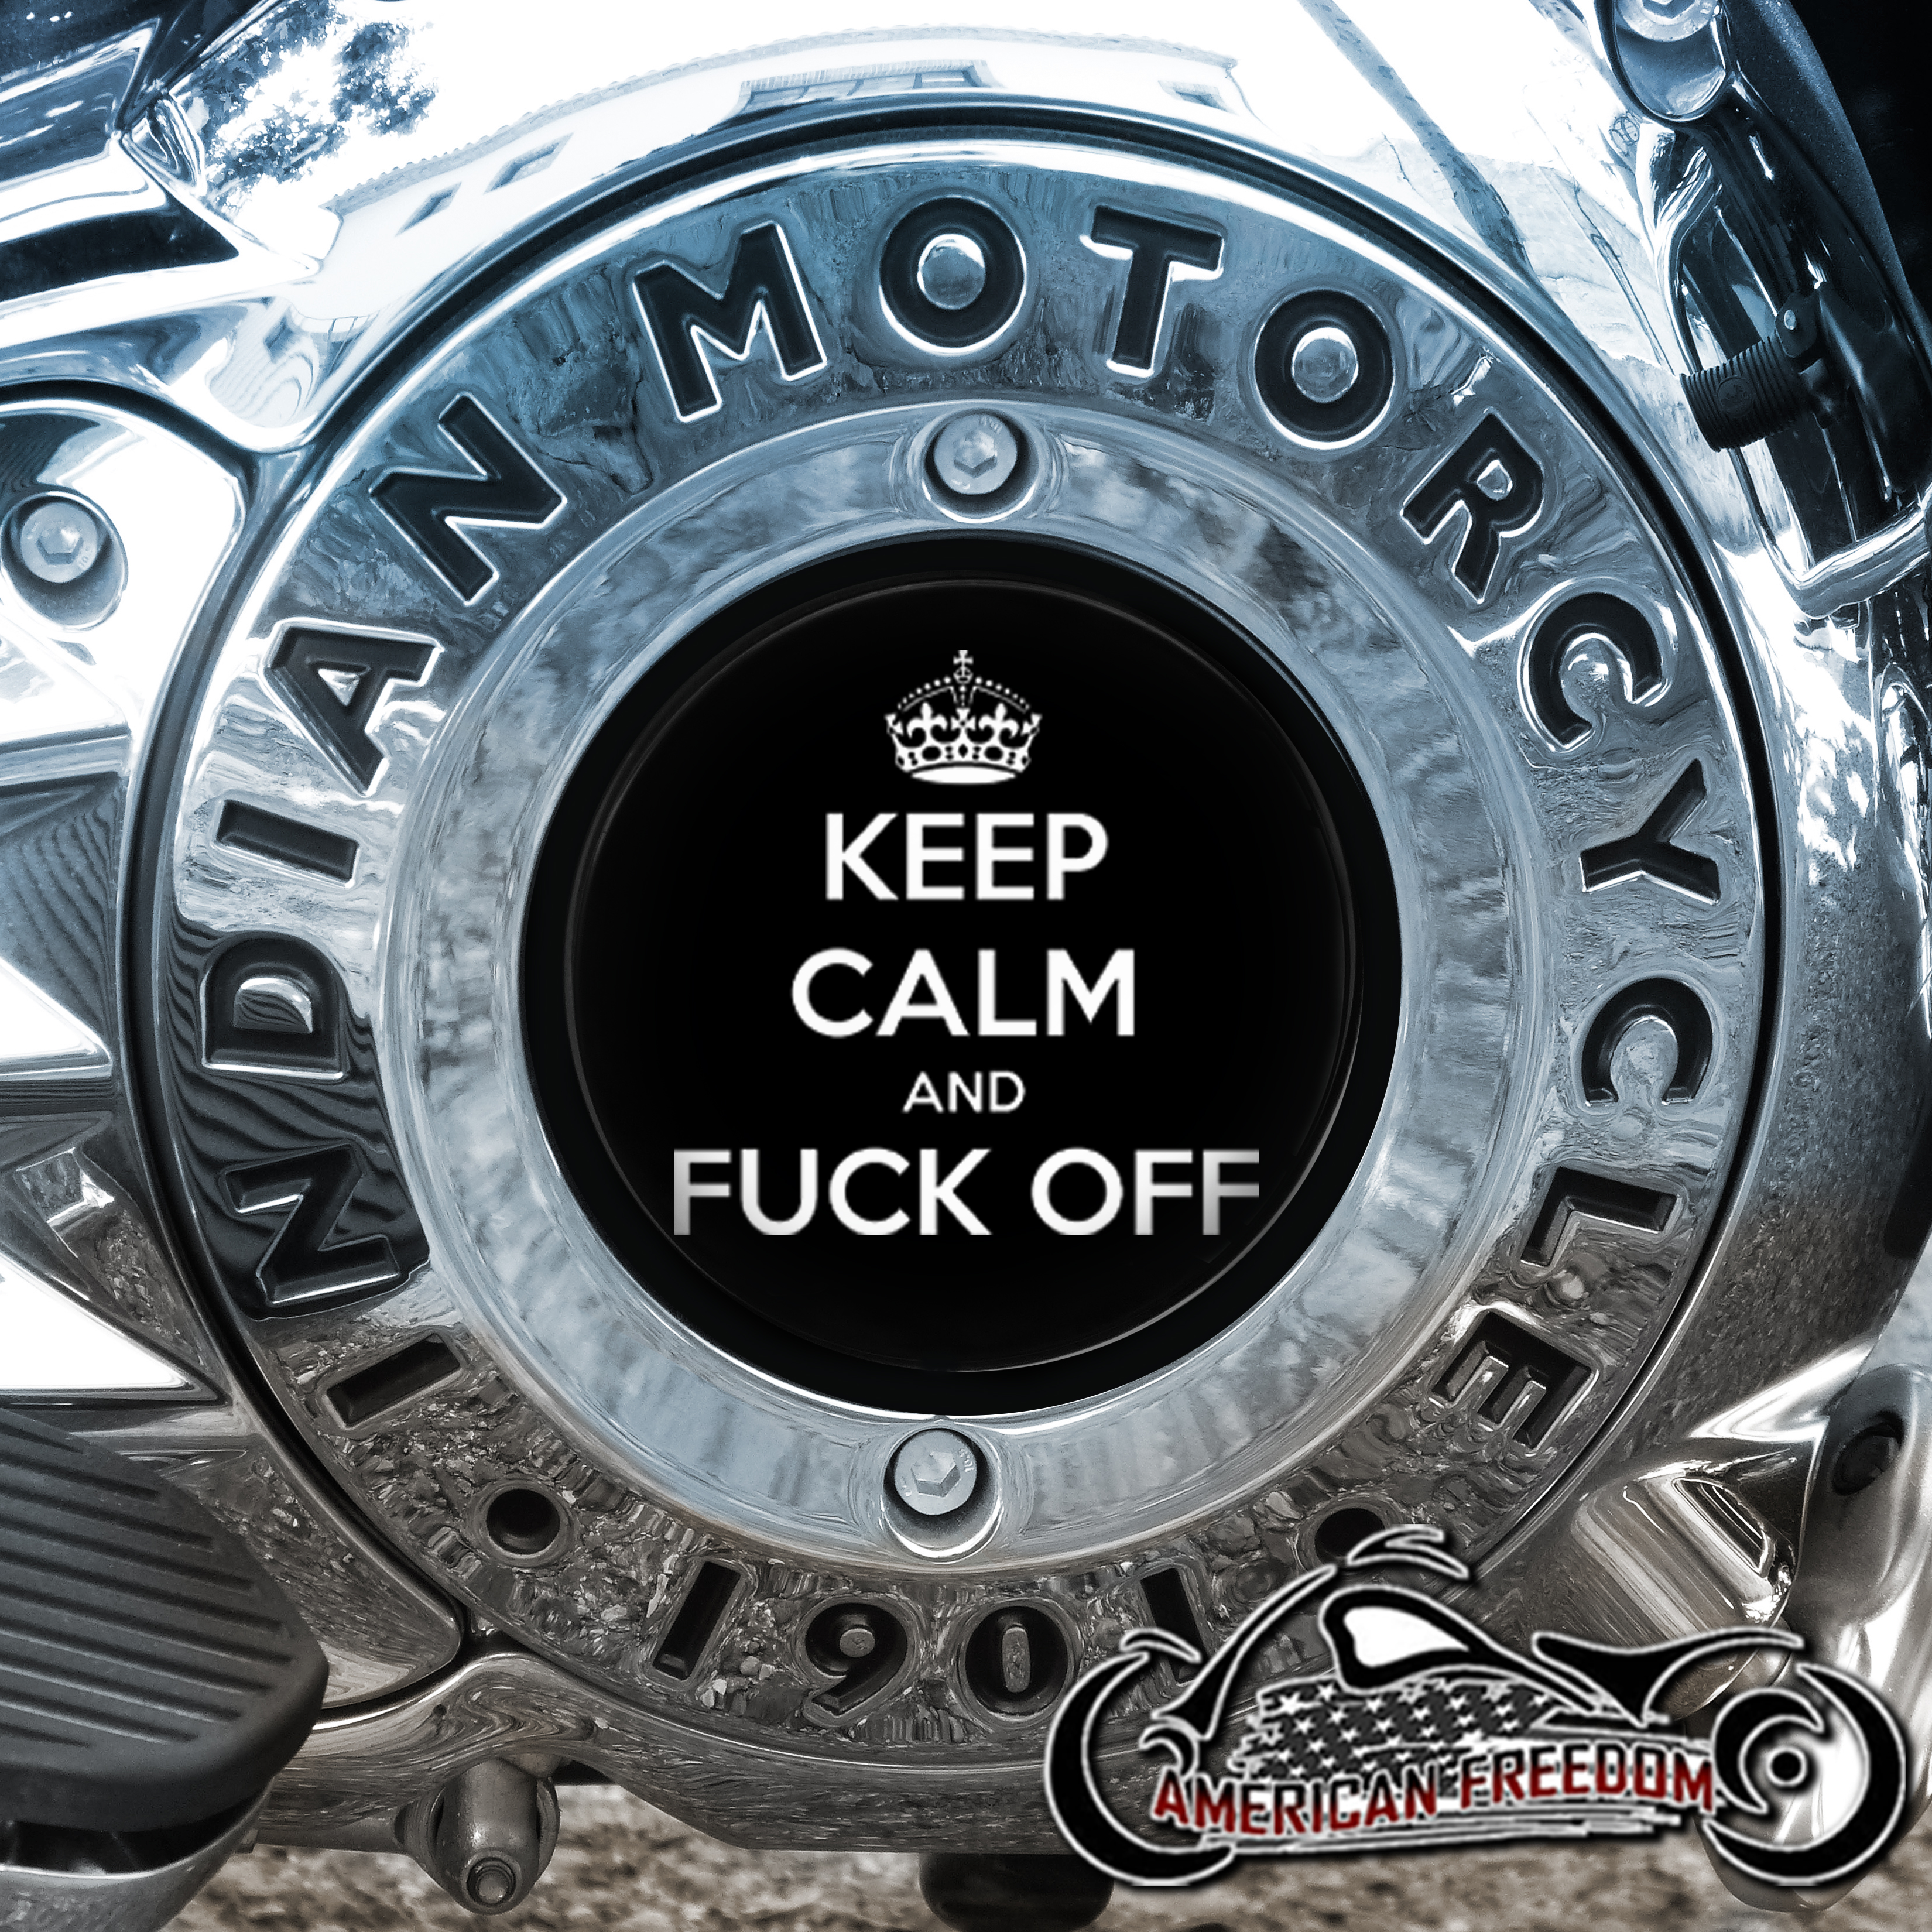 Indian Motorcycles Thunder Stroke Derby Insert - Keep Calm F Off